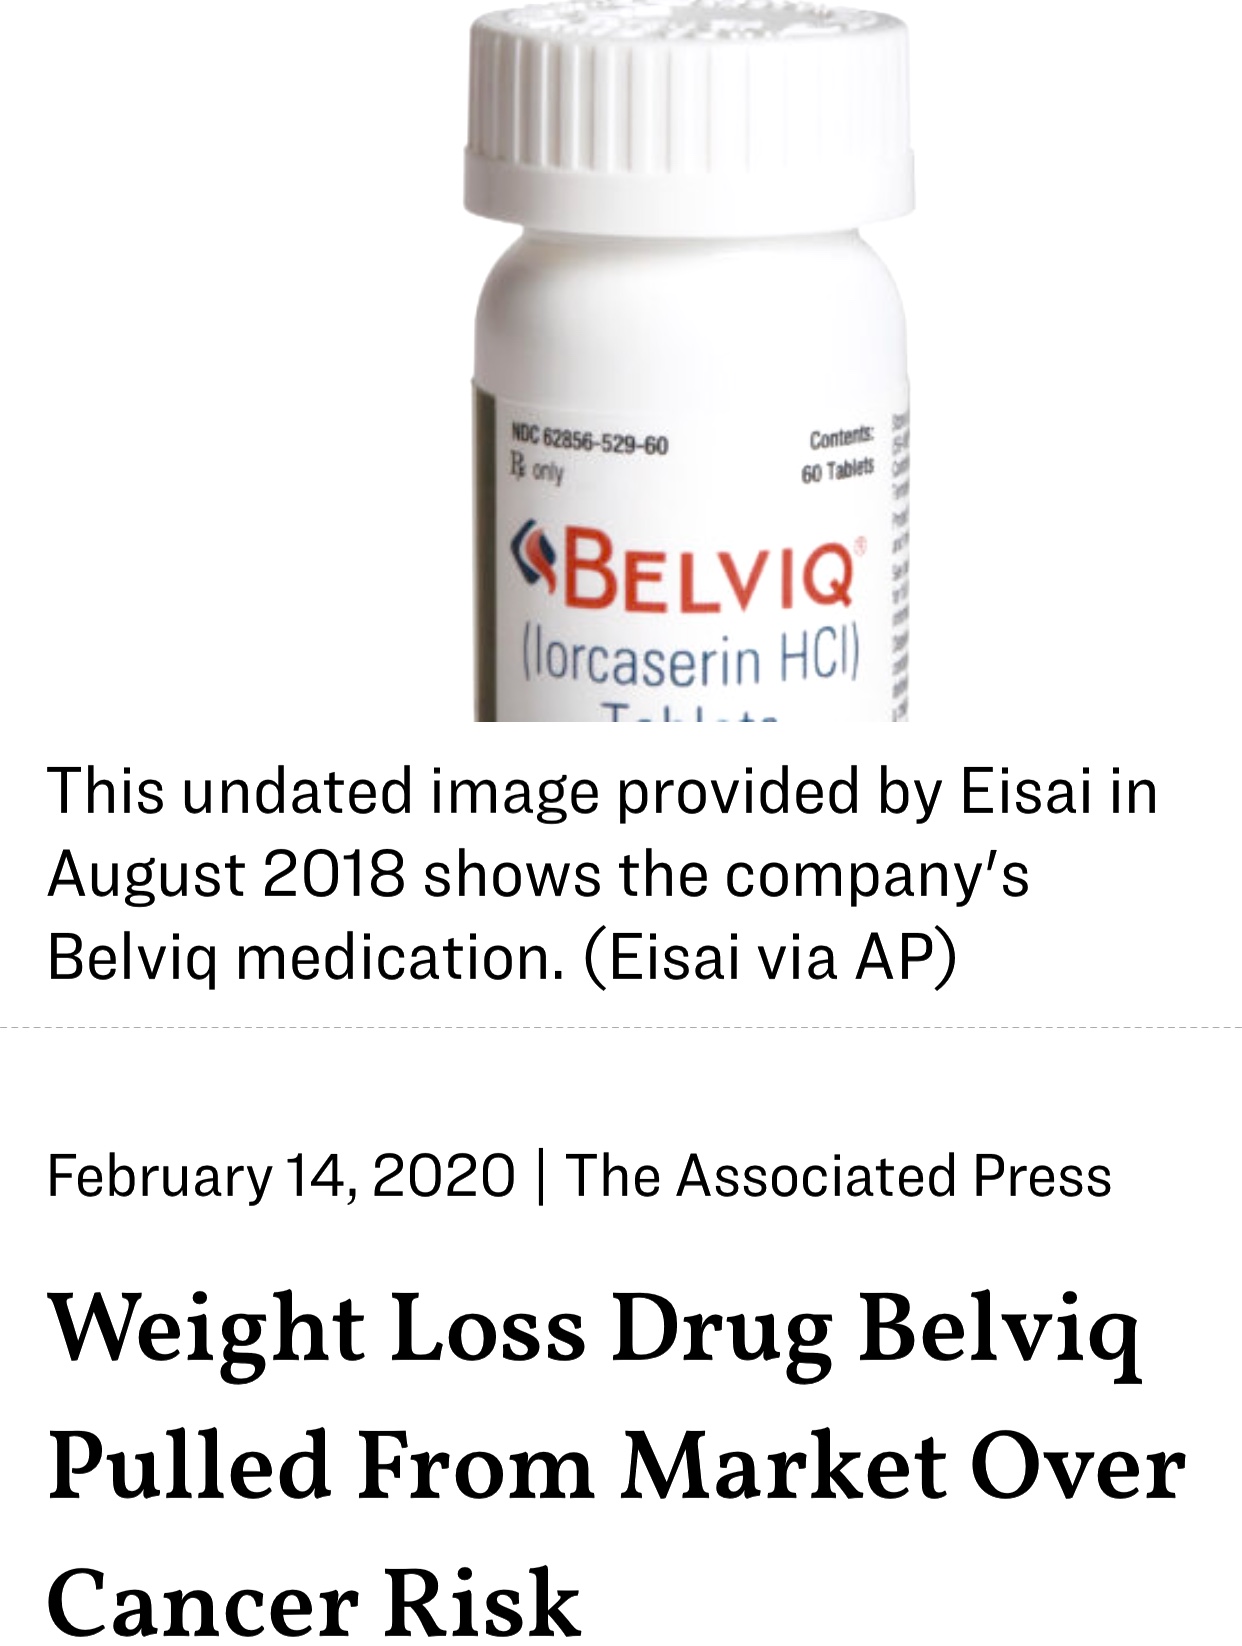 Weight Loss Drug Belviq Pulled From Market Over Cancer Risk